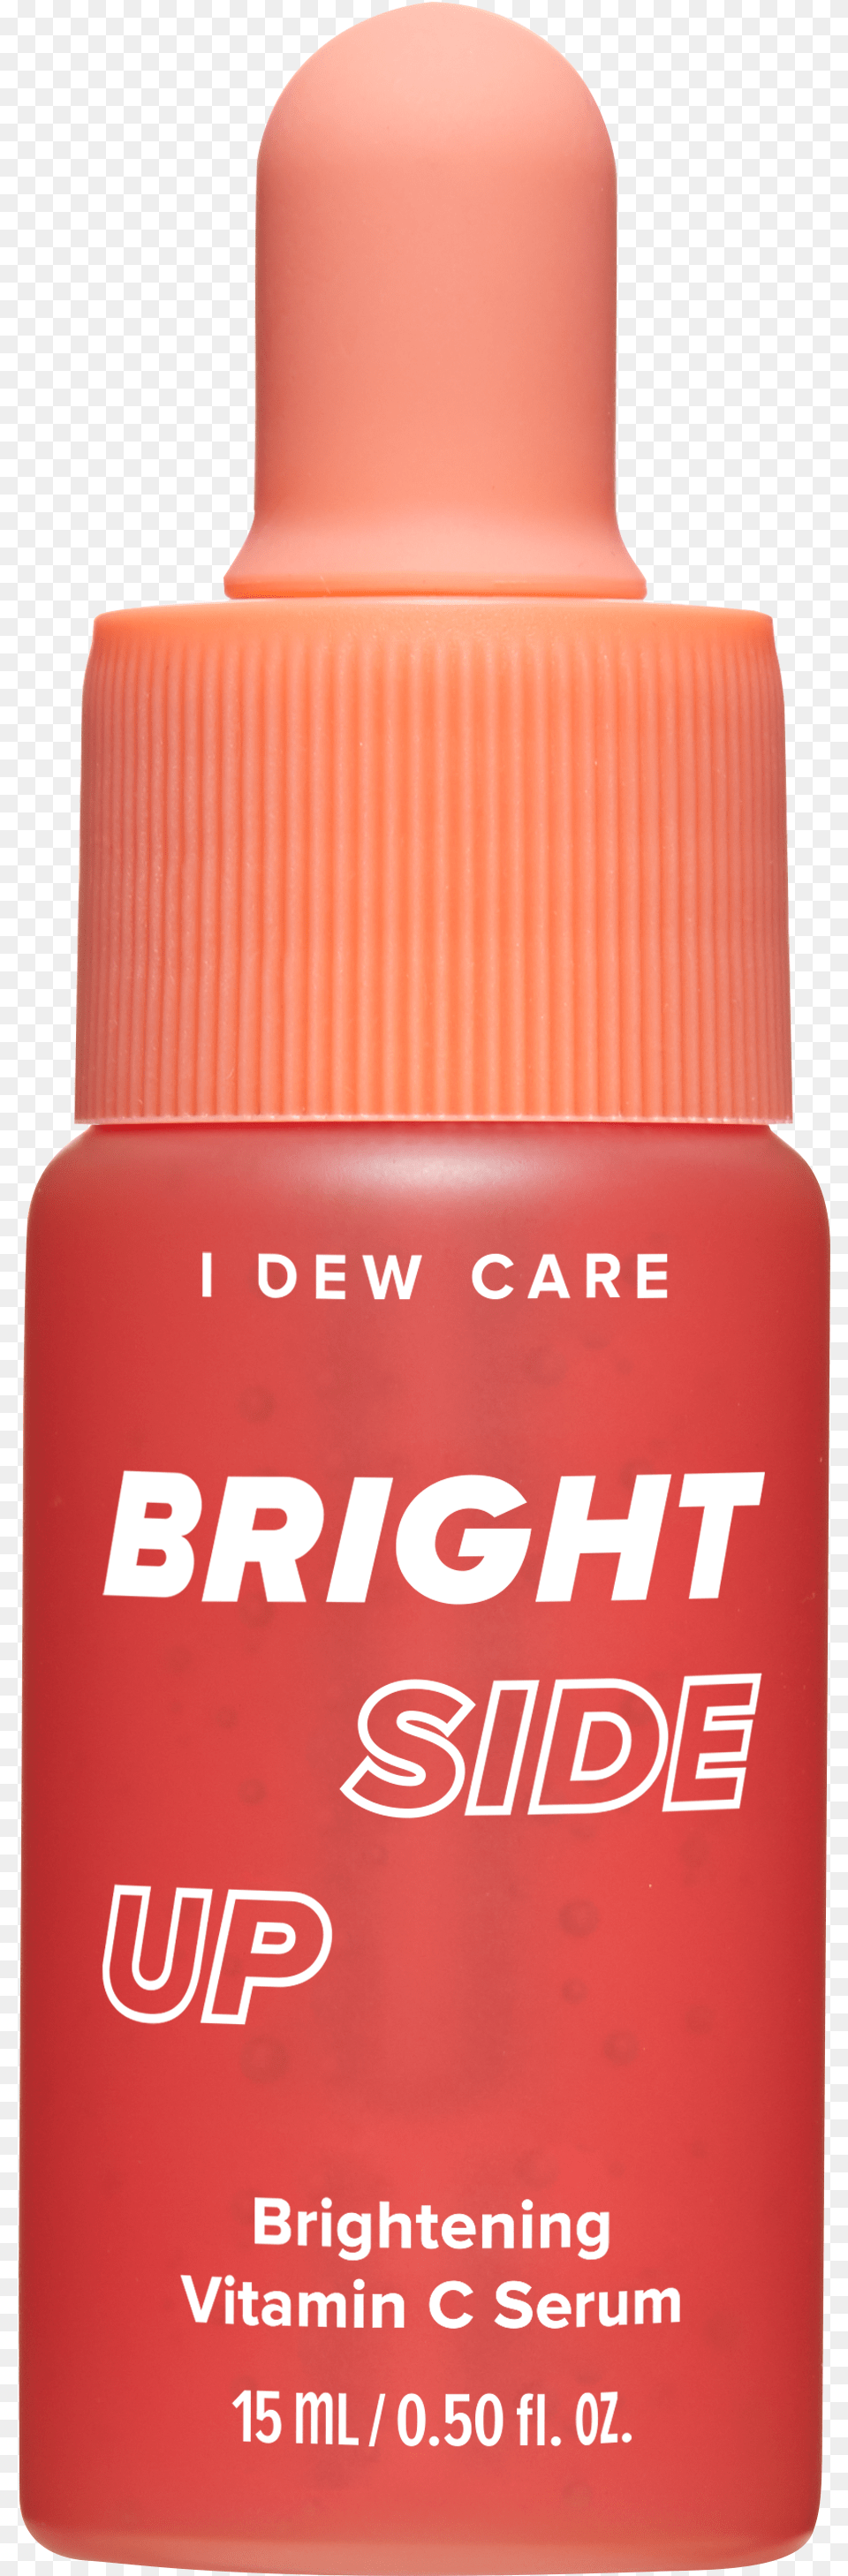 Dew Care Bright Side Up Mini, Bottle, Cosmetics, Food, Ketchup Png